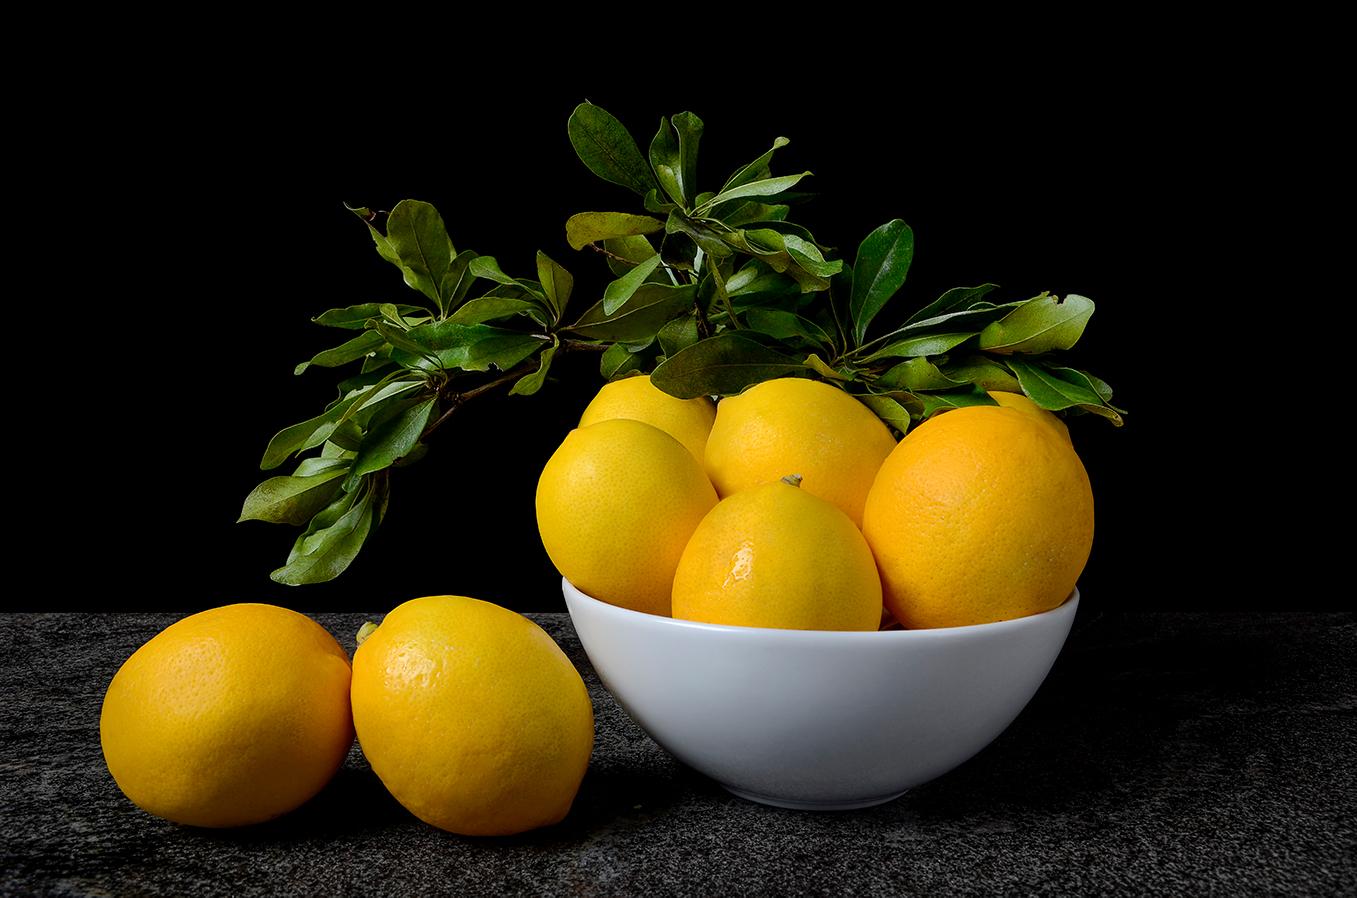 Dora Franco Still-Life Photograph - Limones. From The Bodegones  still life color photography series